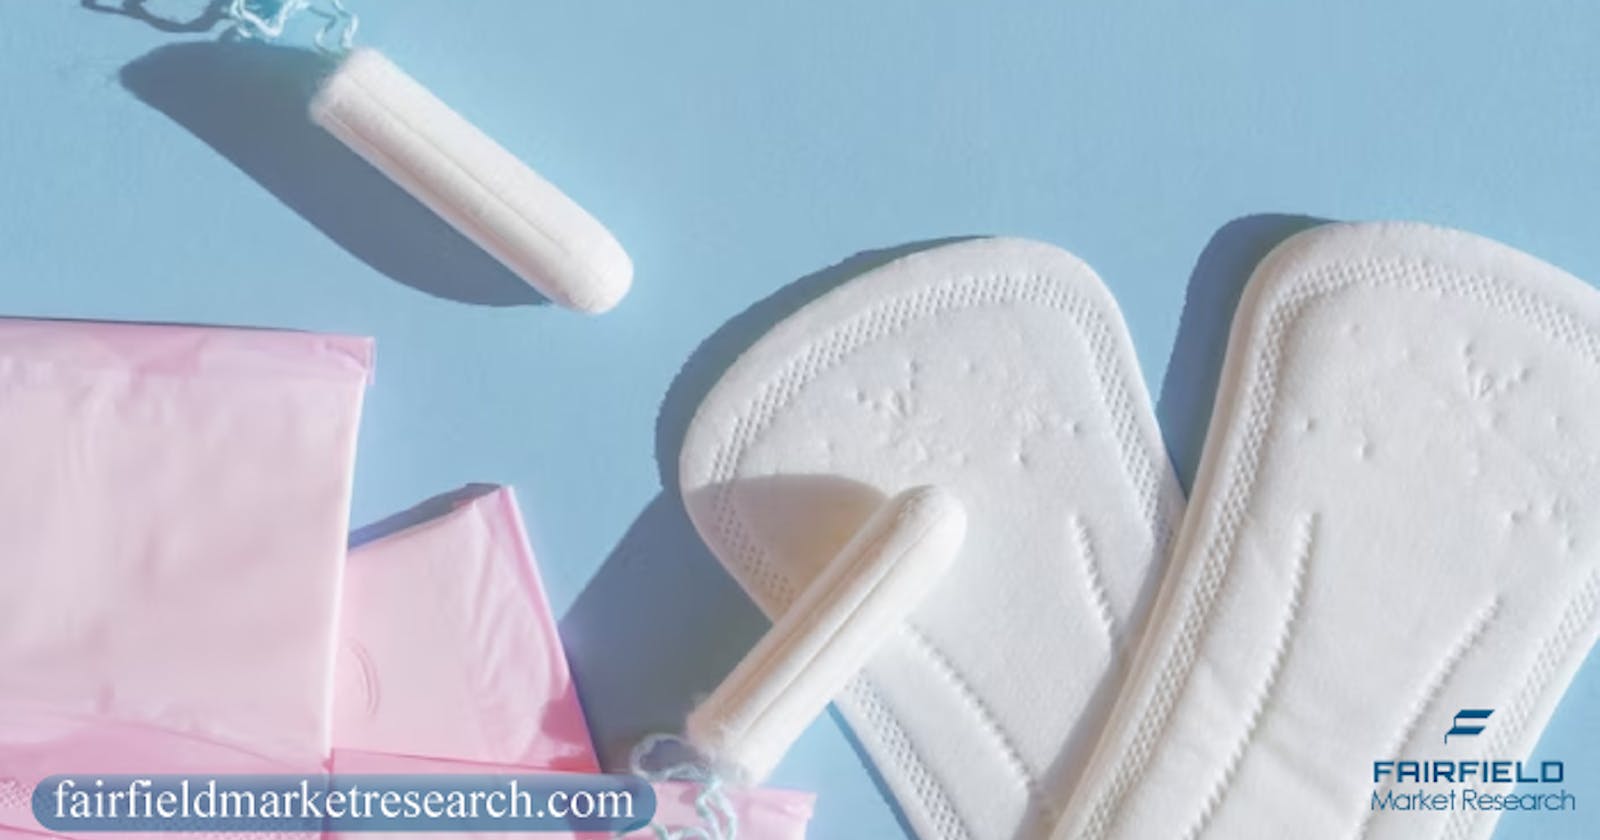 Global Incontinence Pads Market Set to Surpass $10 Billion Mark by 2030: A Resilient Growth Trajectory